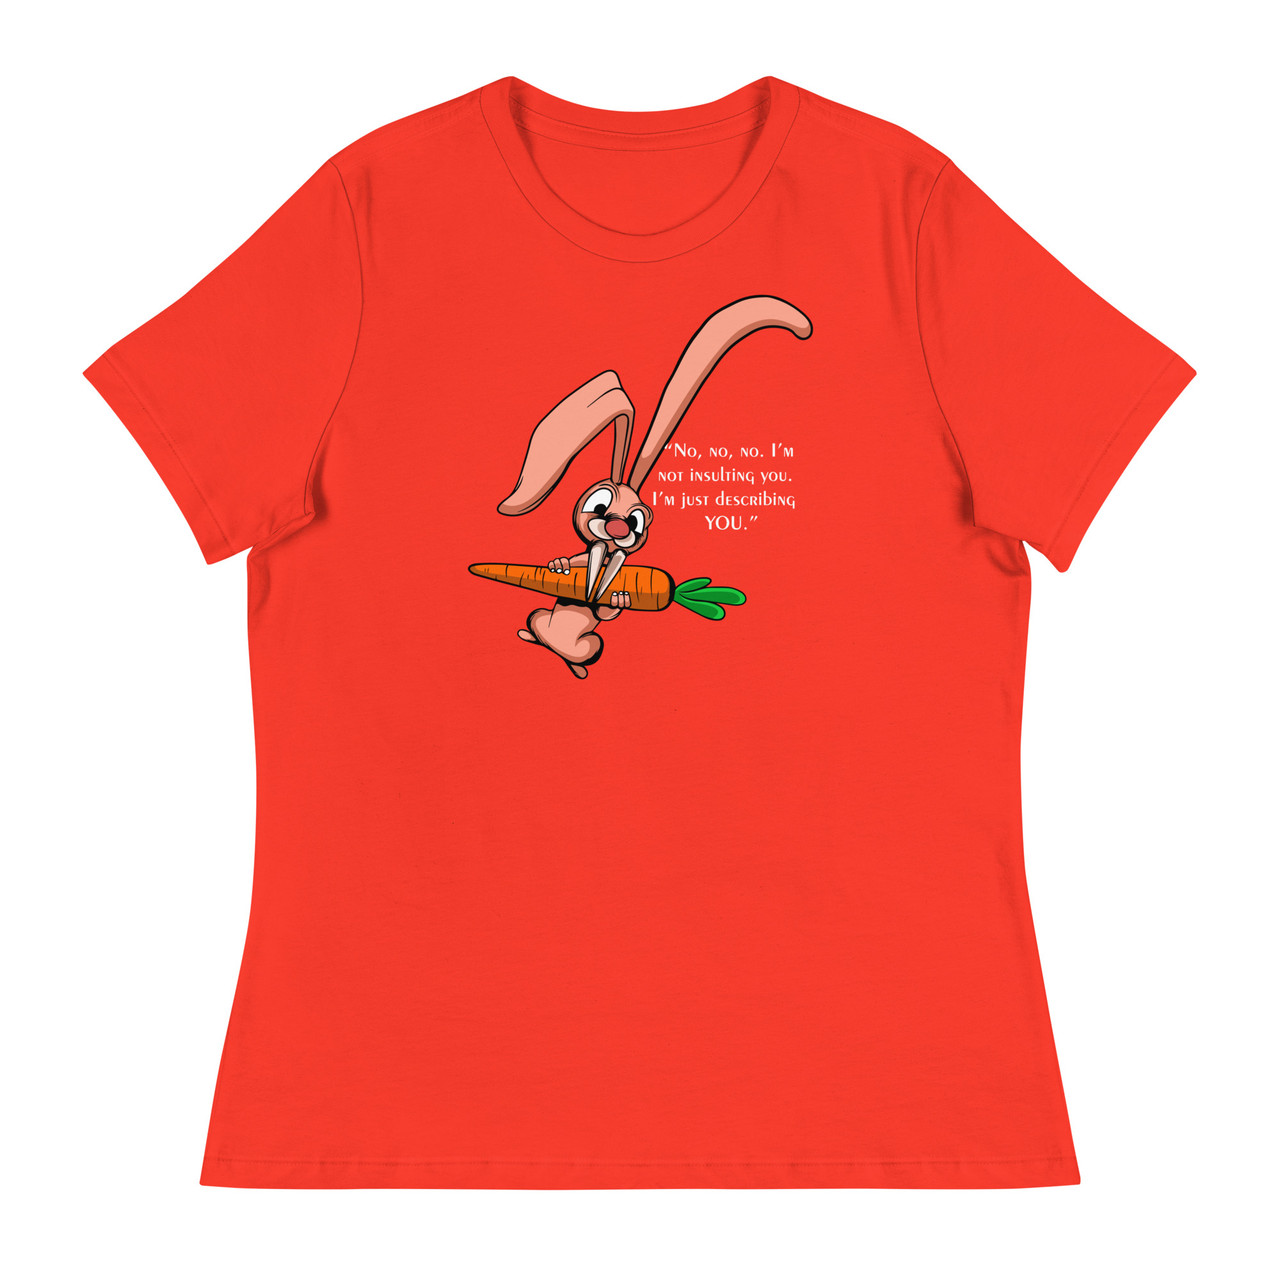 No,no,no I'm not insulting you. I'm just describing you Women's Relaxed T-Shirt - Bella + Canvas 6400 